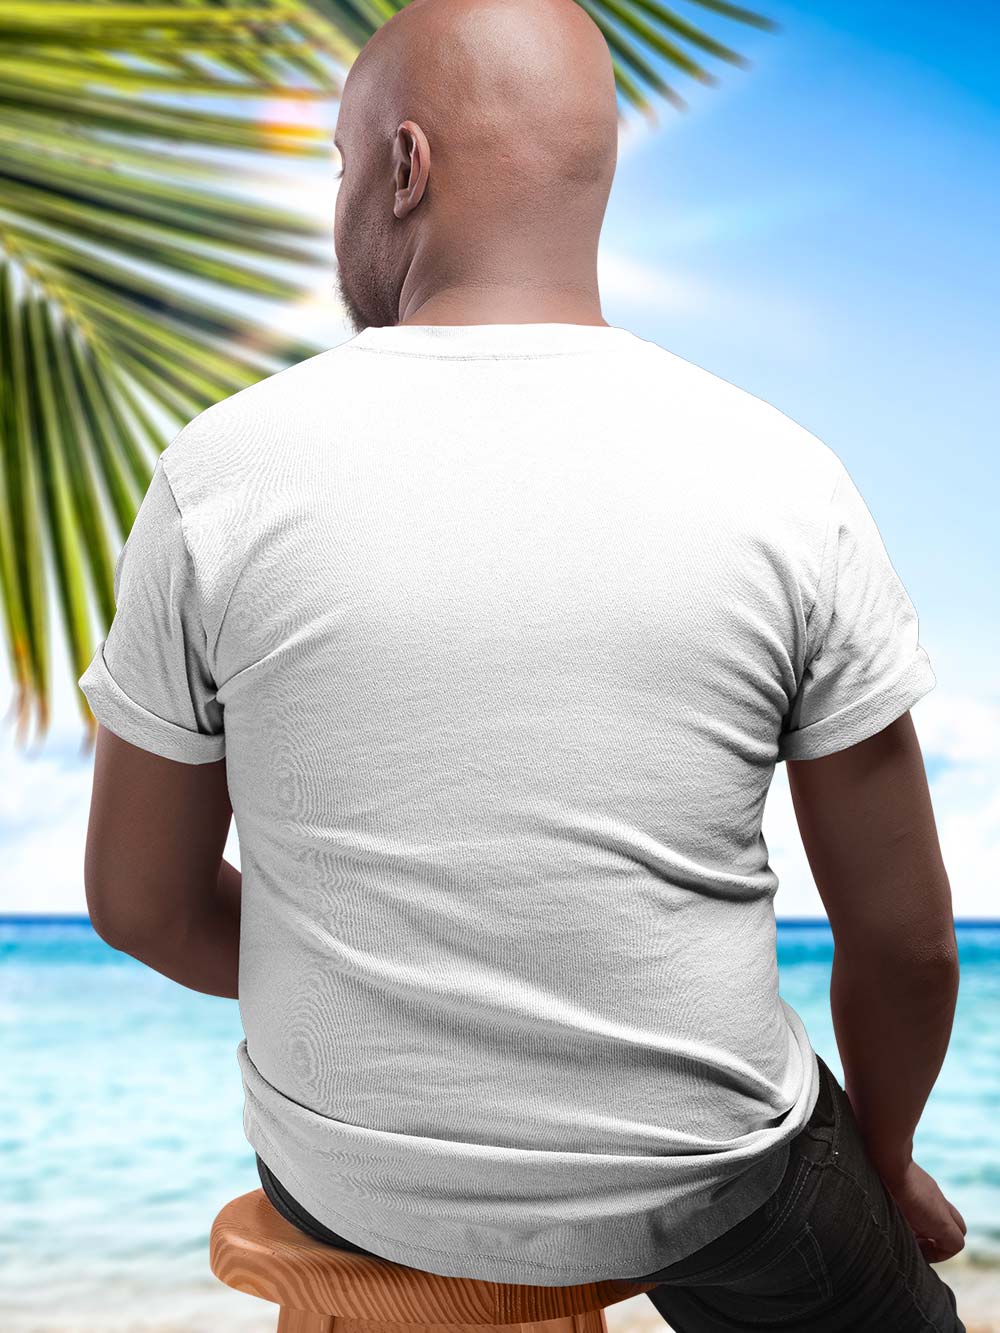 The Beach Body Classic Tee White on Dad Bod